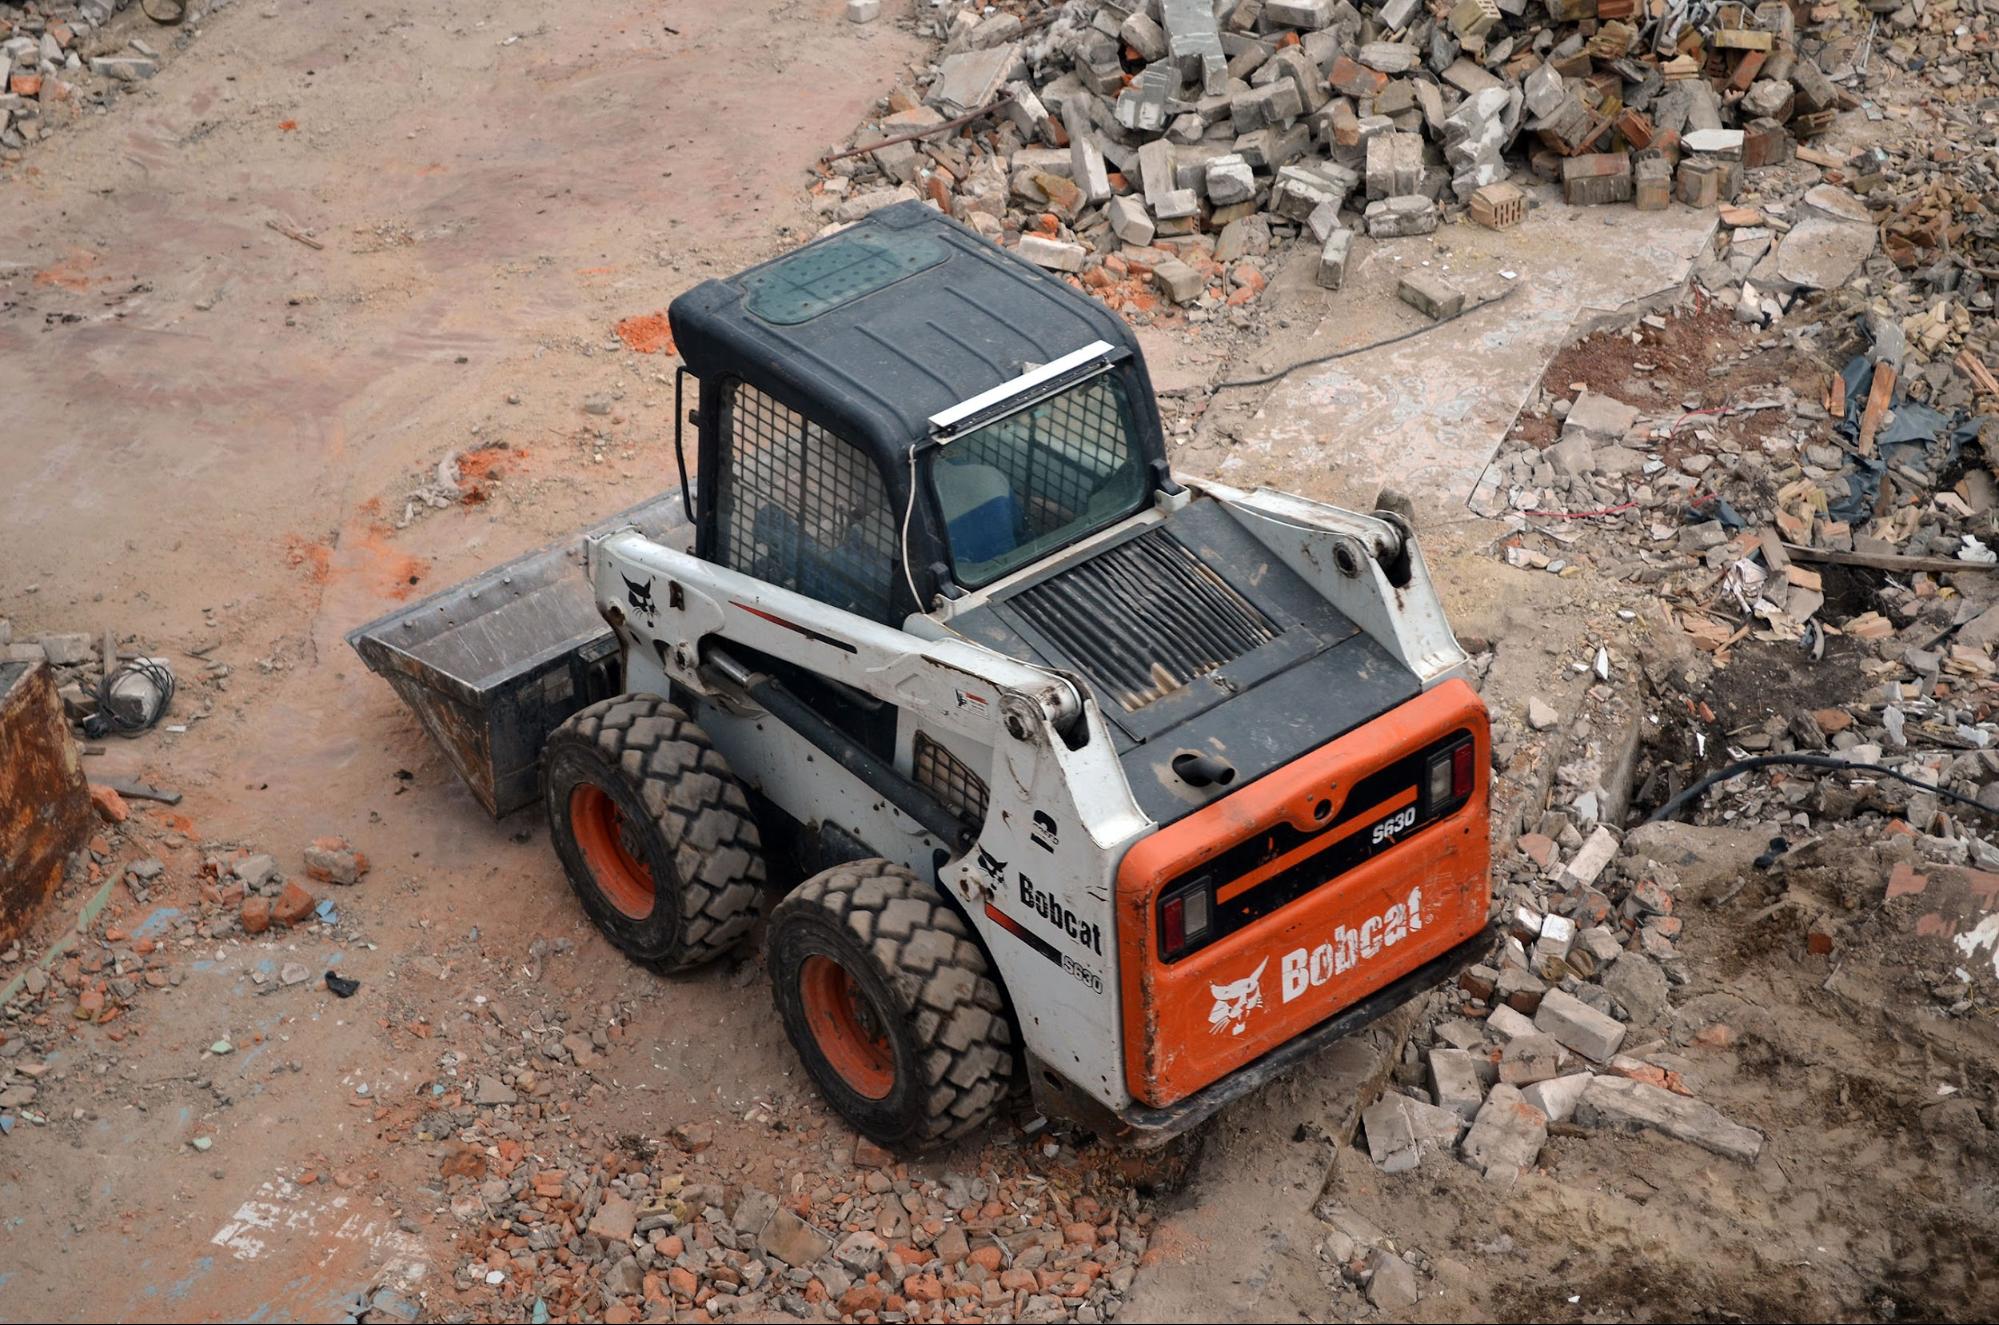 A white bobcat loader in a construction site